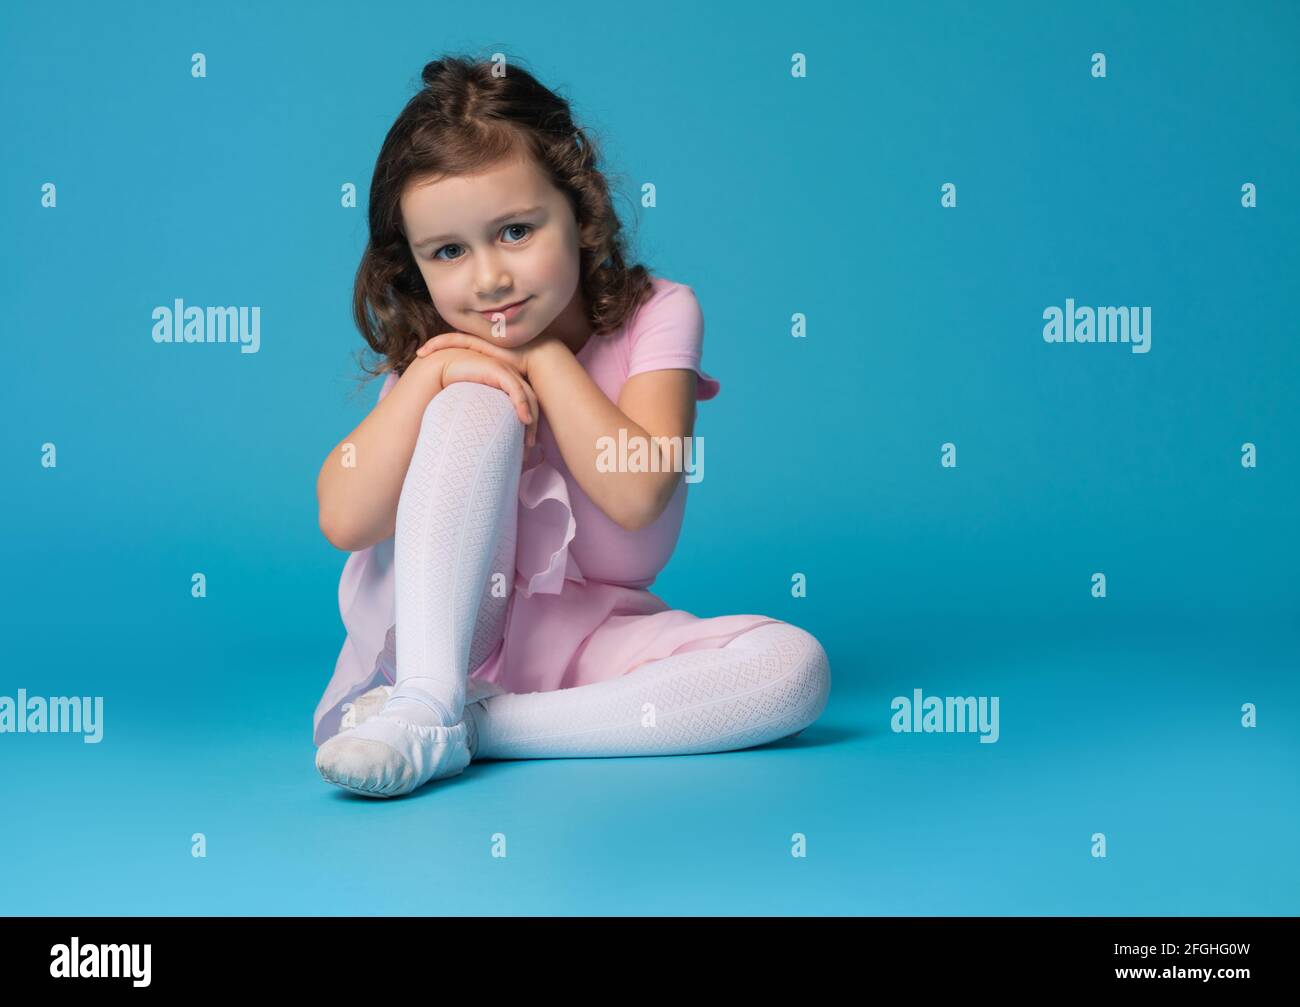 Adorable preschool girl child, ballet dancer, posing to the camera, sitting over blue background with copy space Stock Photo